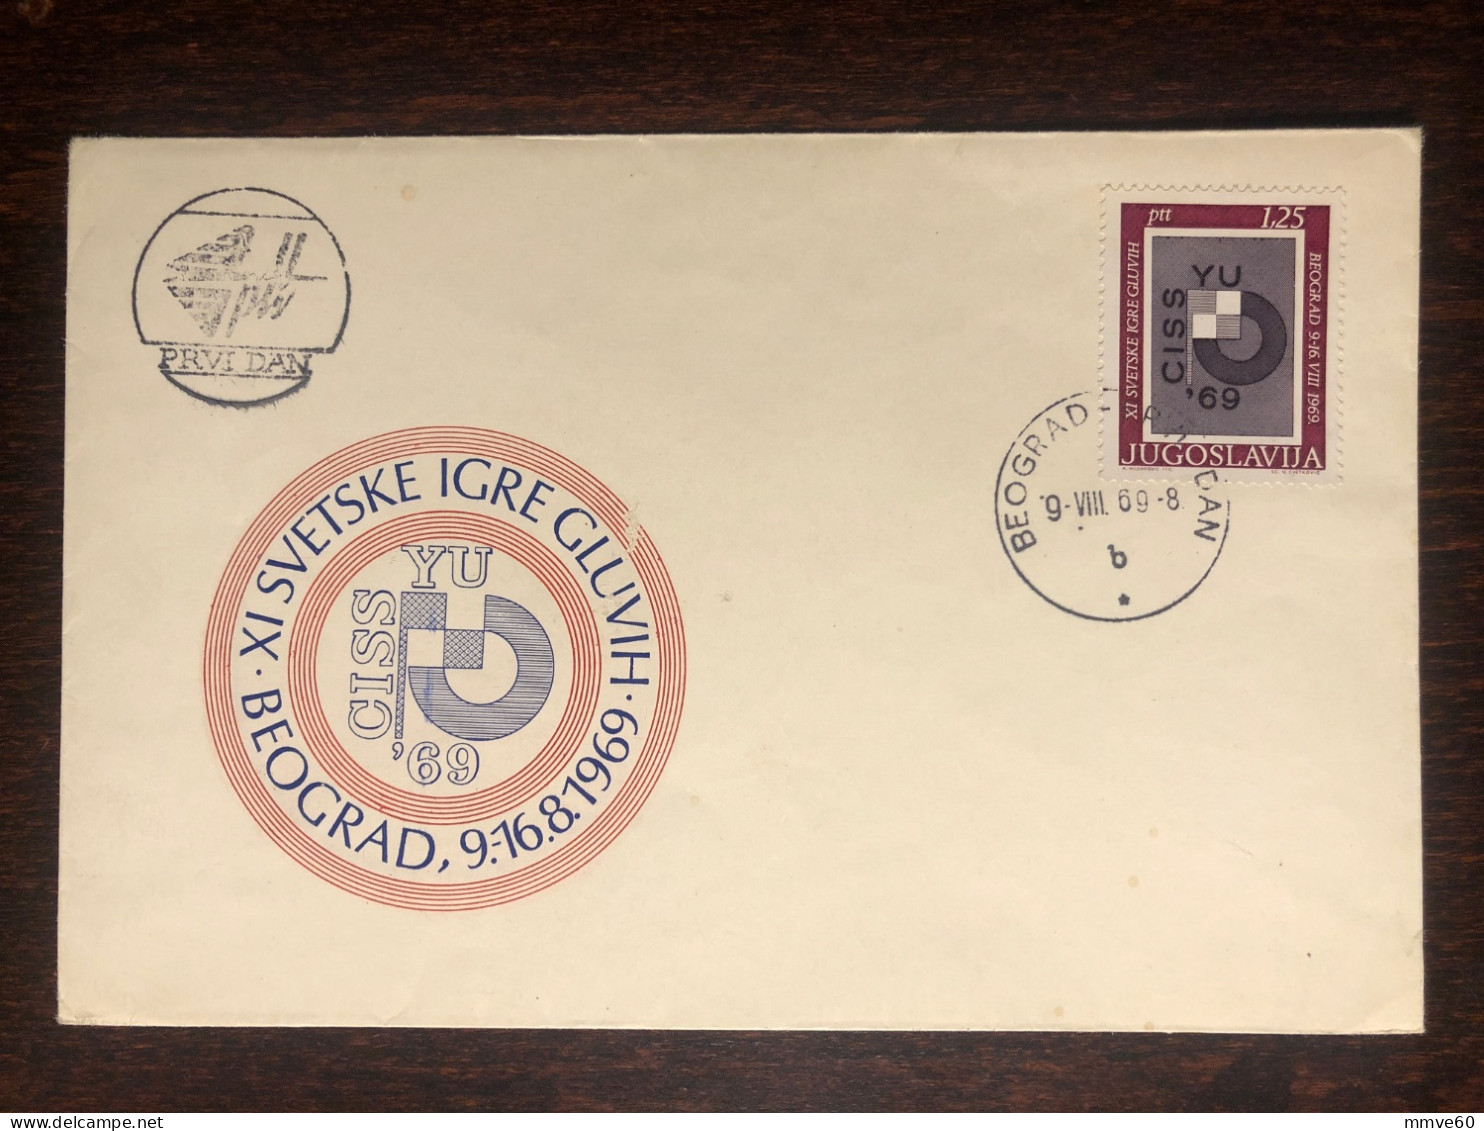 YUGOSLAVIA FDC COVER 1969 YEAR DEAF PEOPLE HEALTH MEDICINE STAMPS - FDC